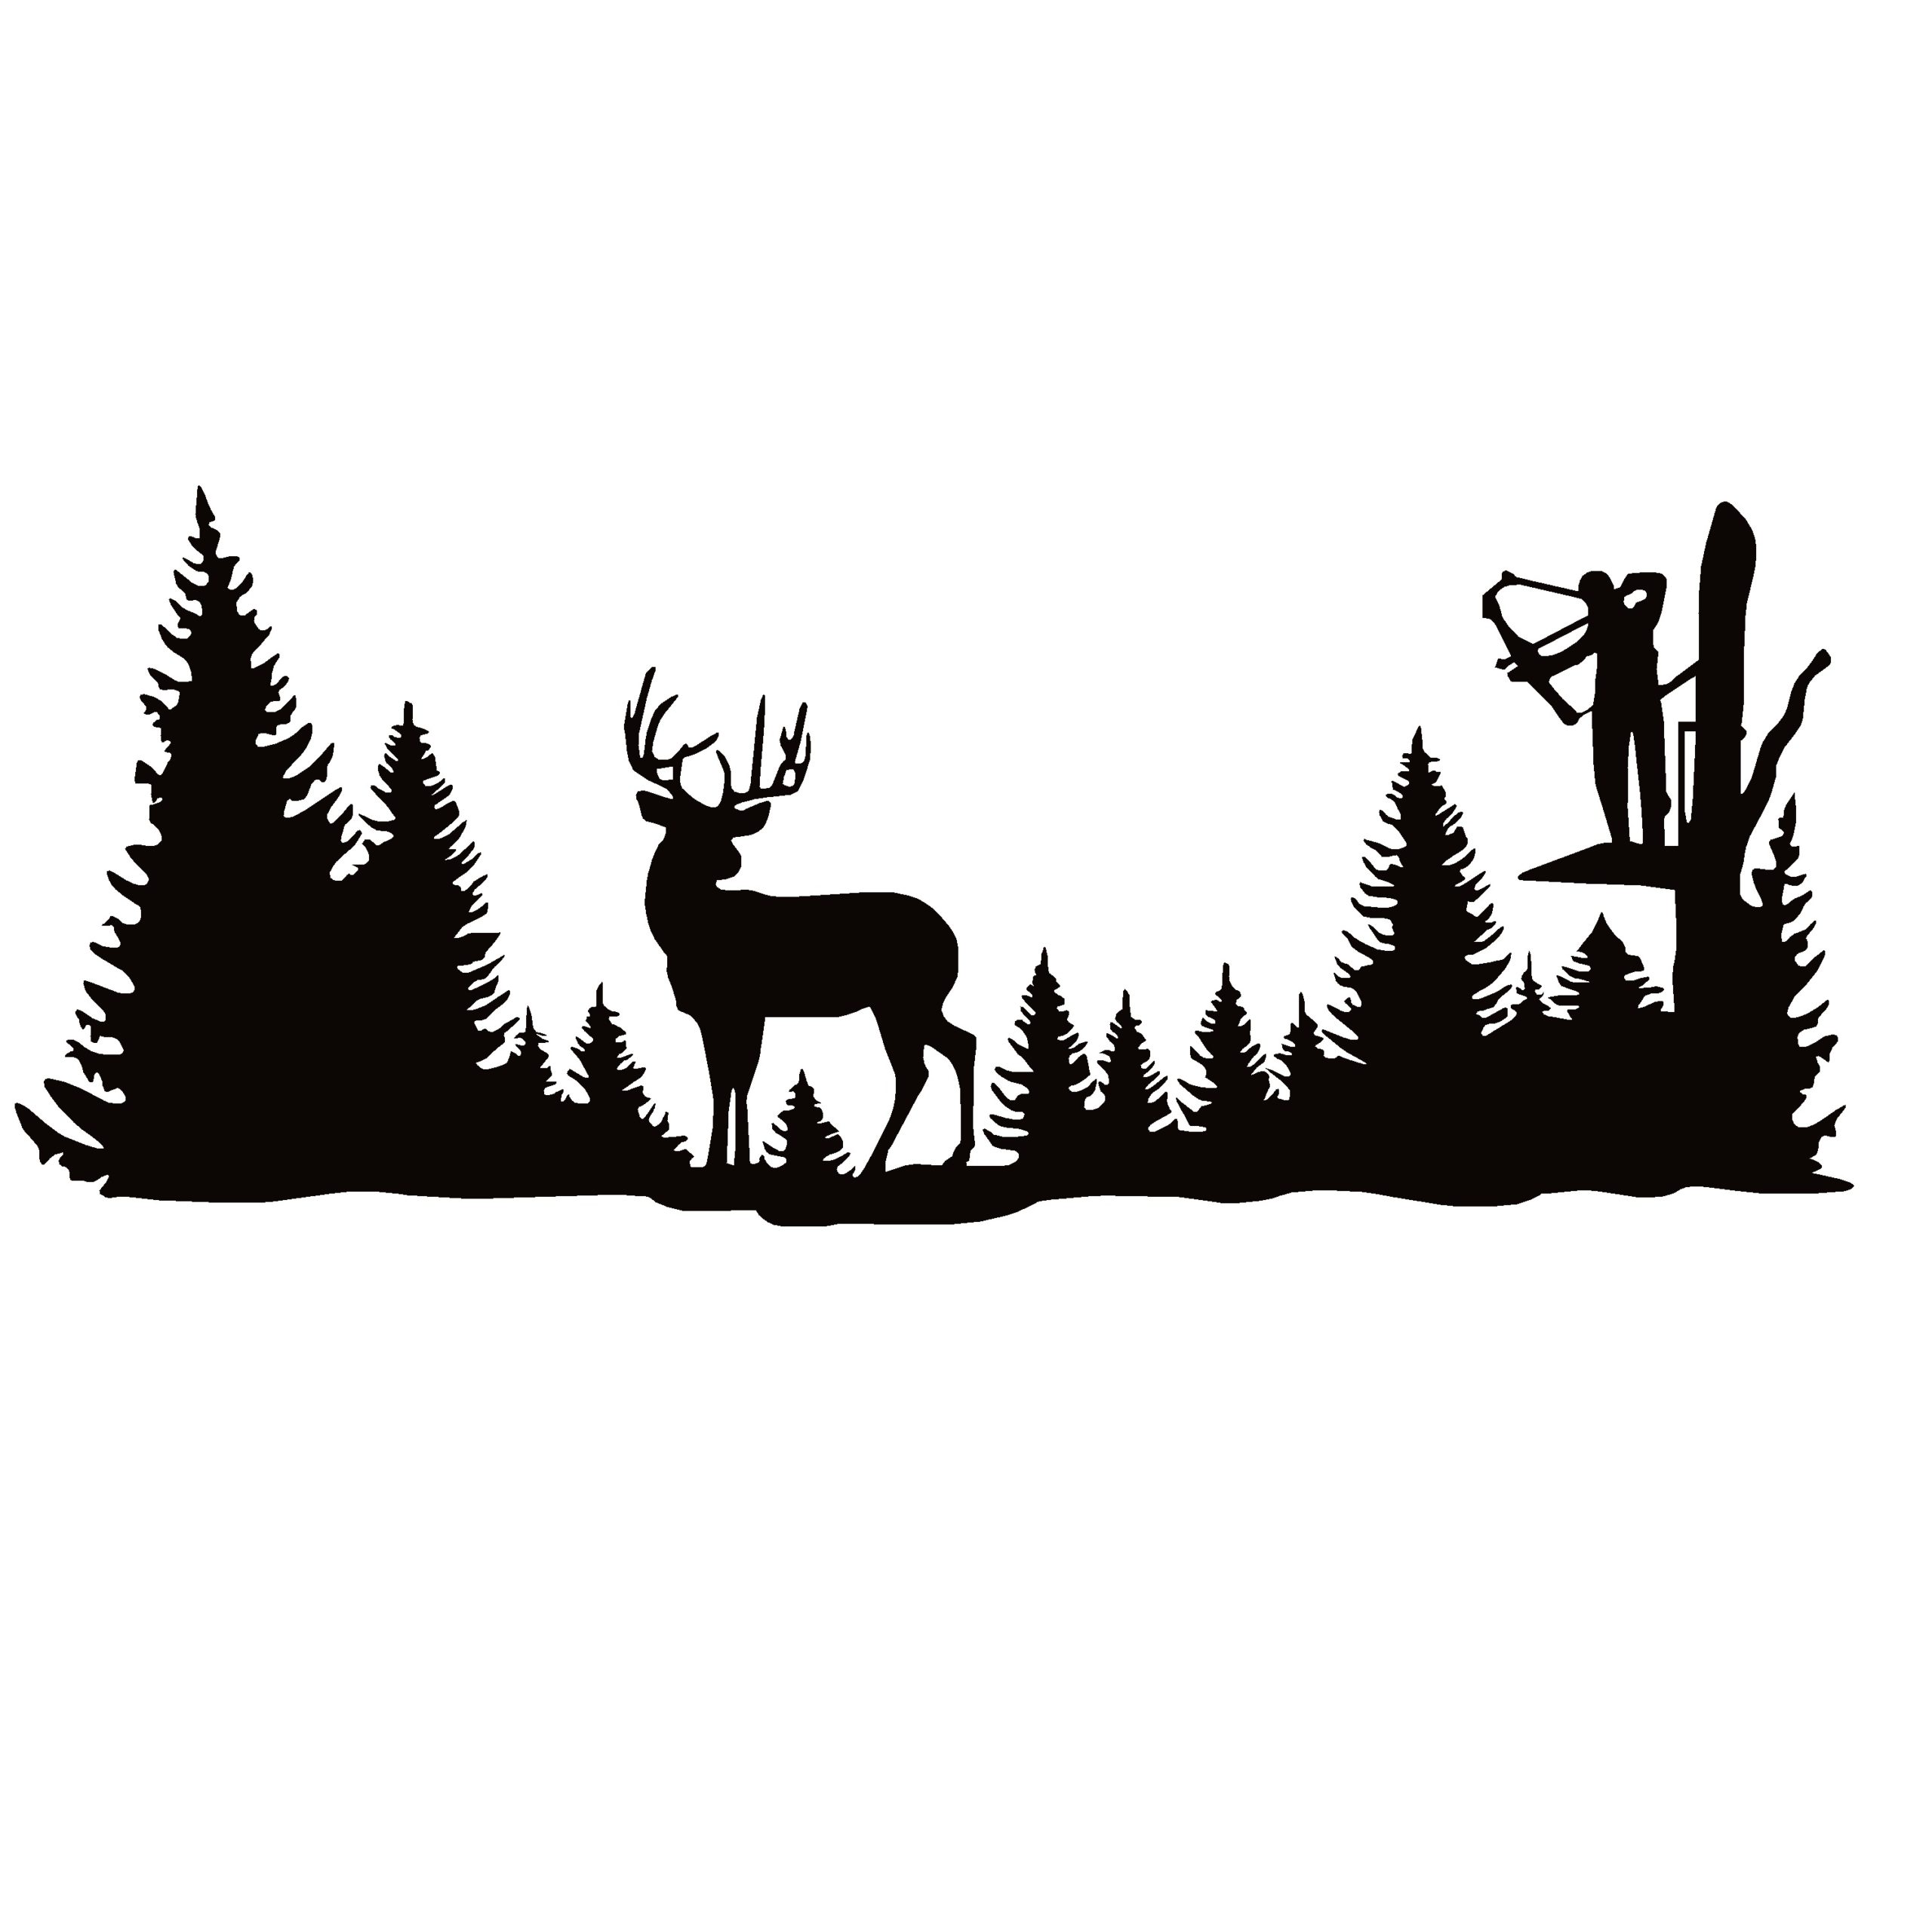 Archery Deer Stand Hunting Decal Archery Deer Stand Hunting Sticker 4858